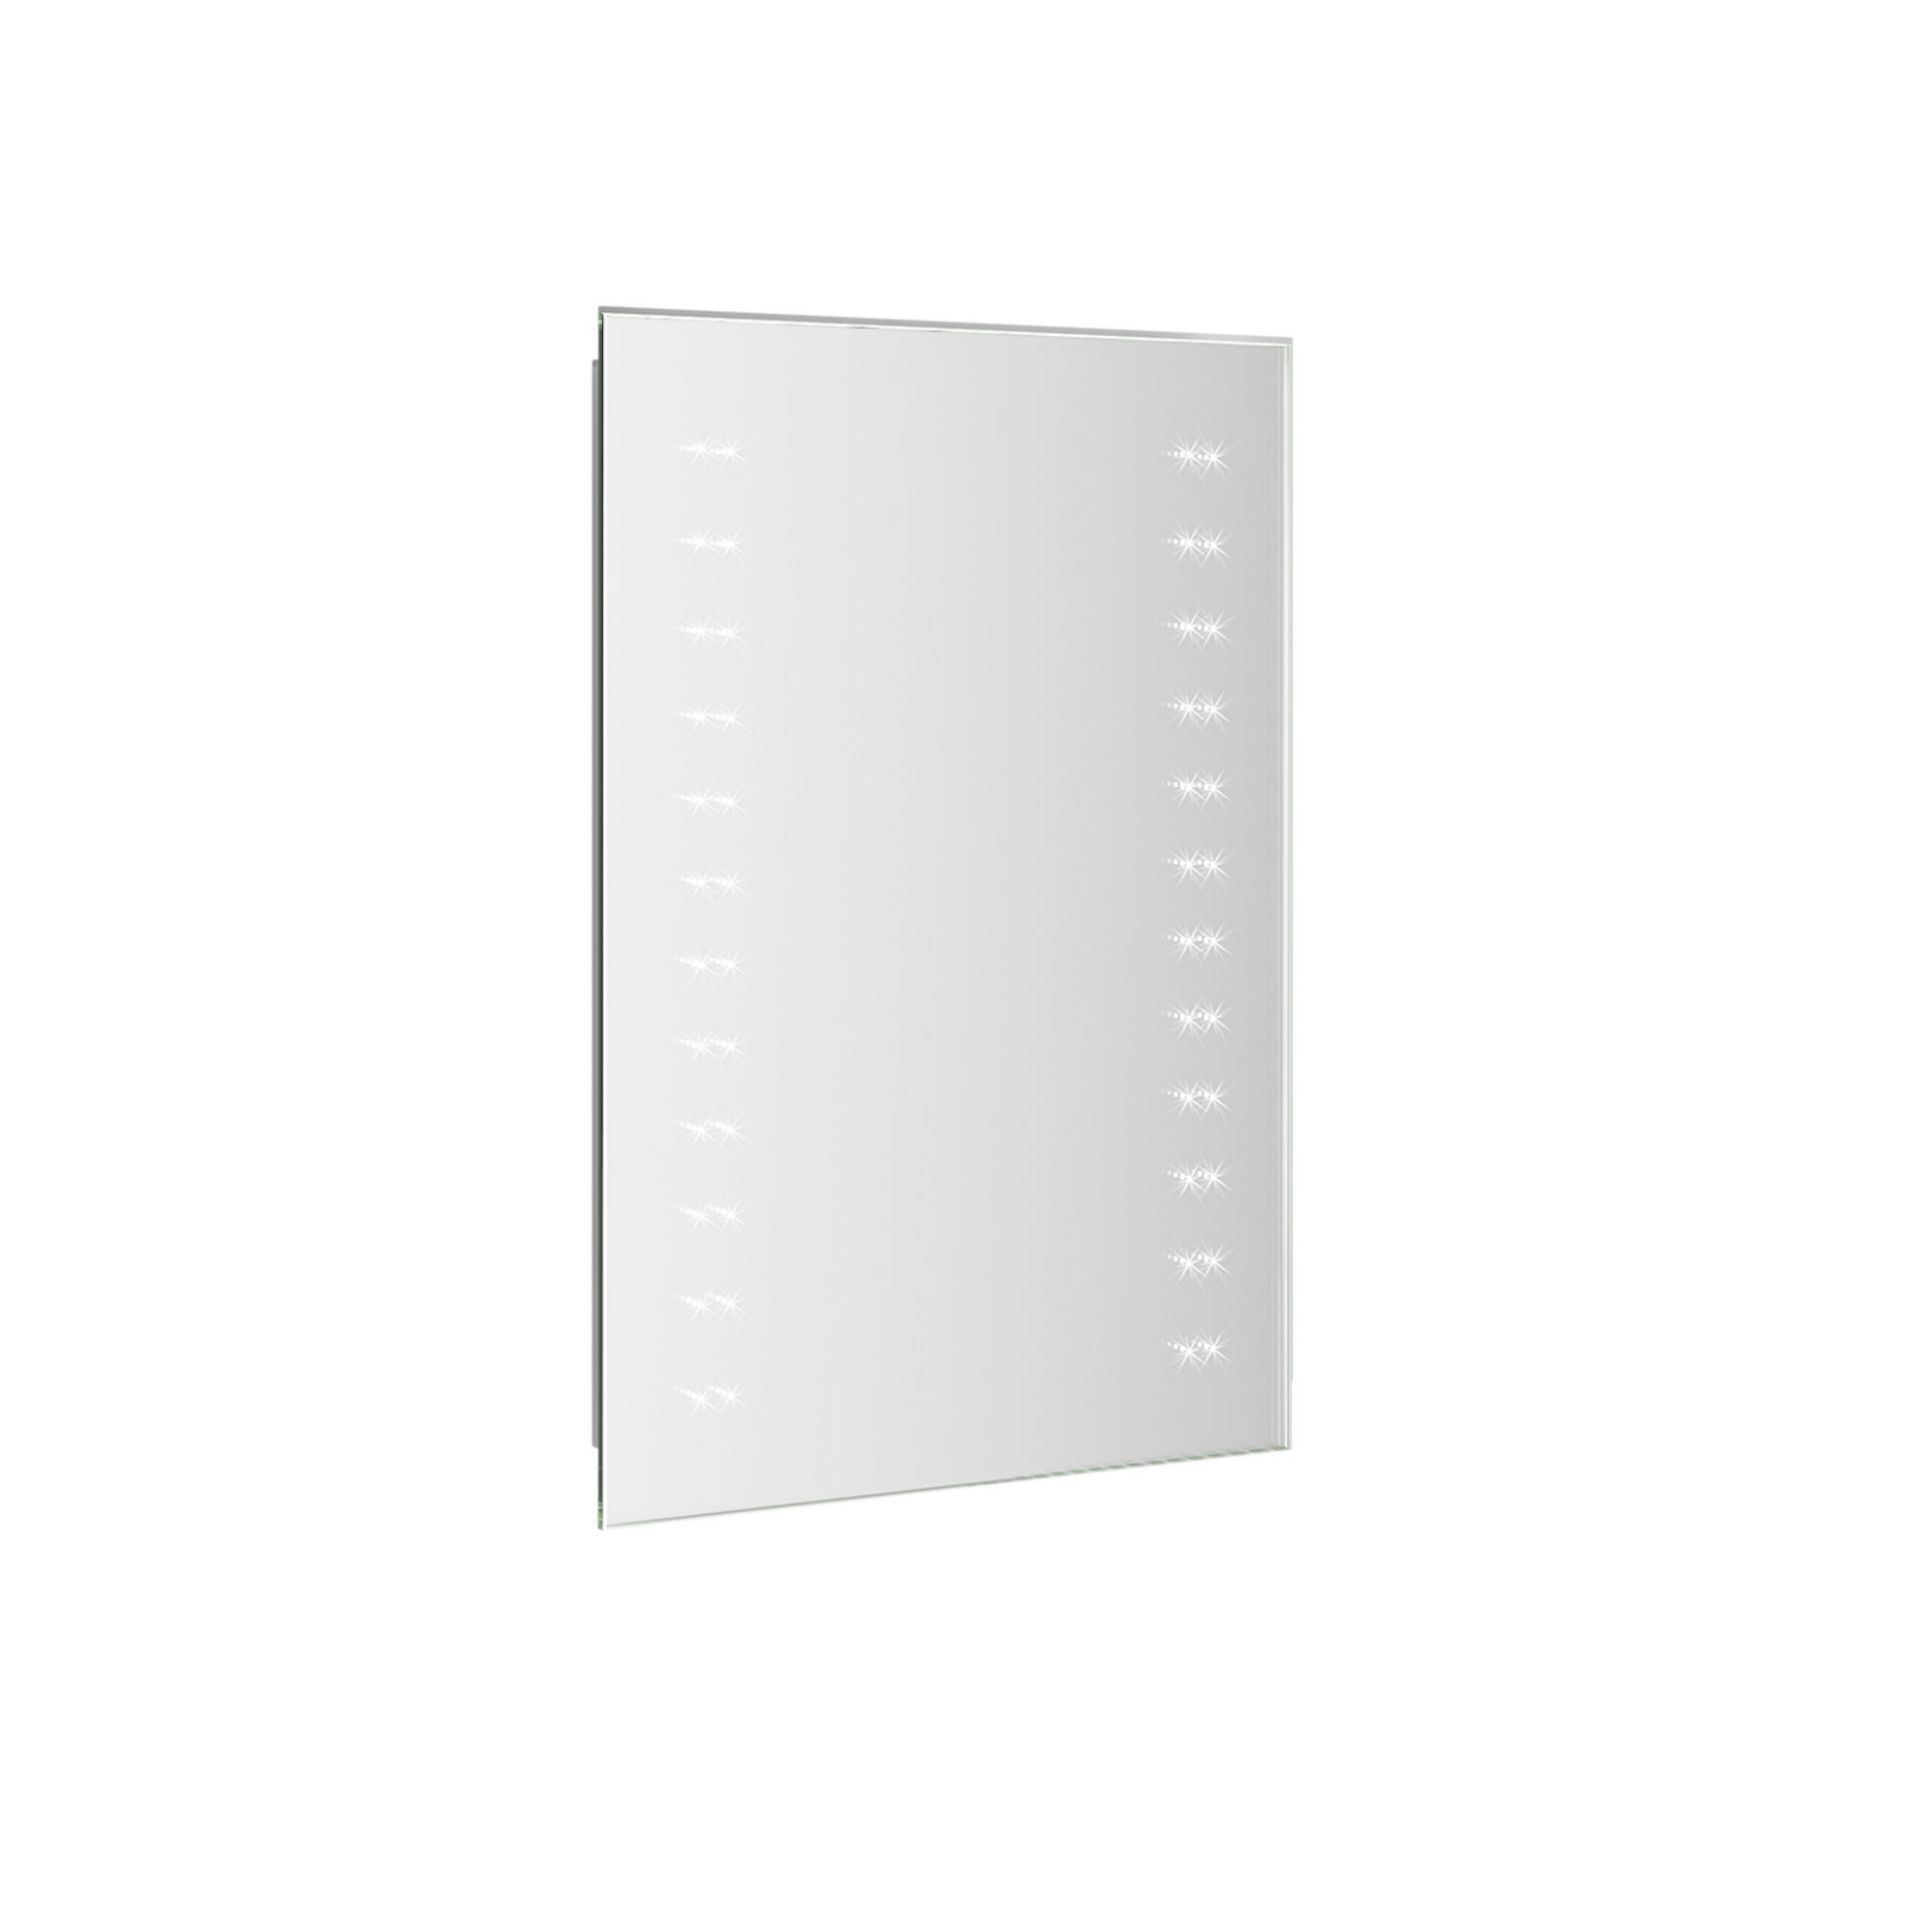 (ZL285) 390x500mm Battery Operated LED Mirror. Energy saving controlled On / Off switch Convenient